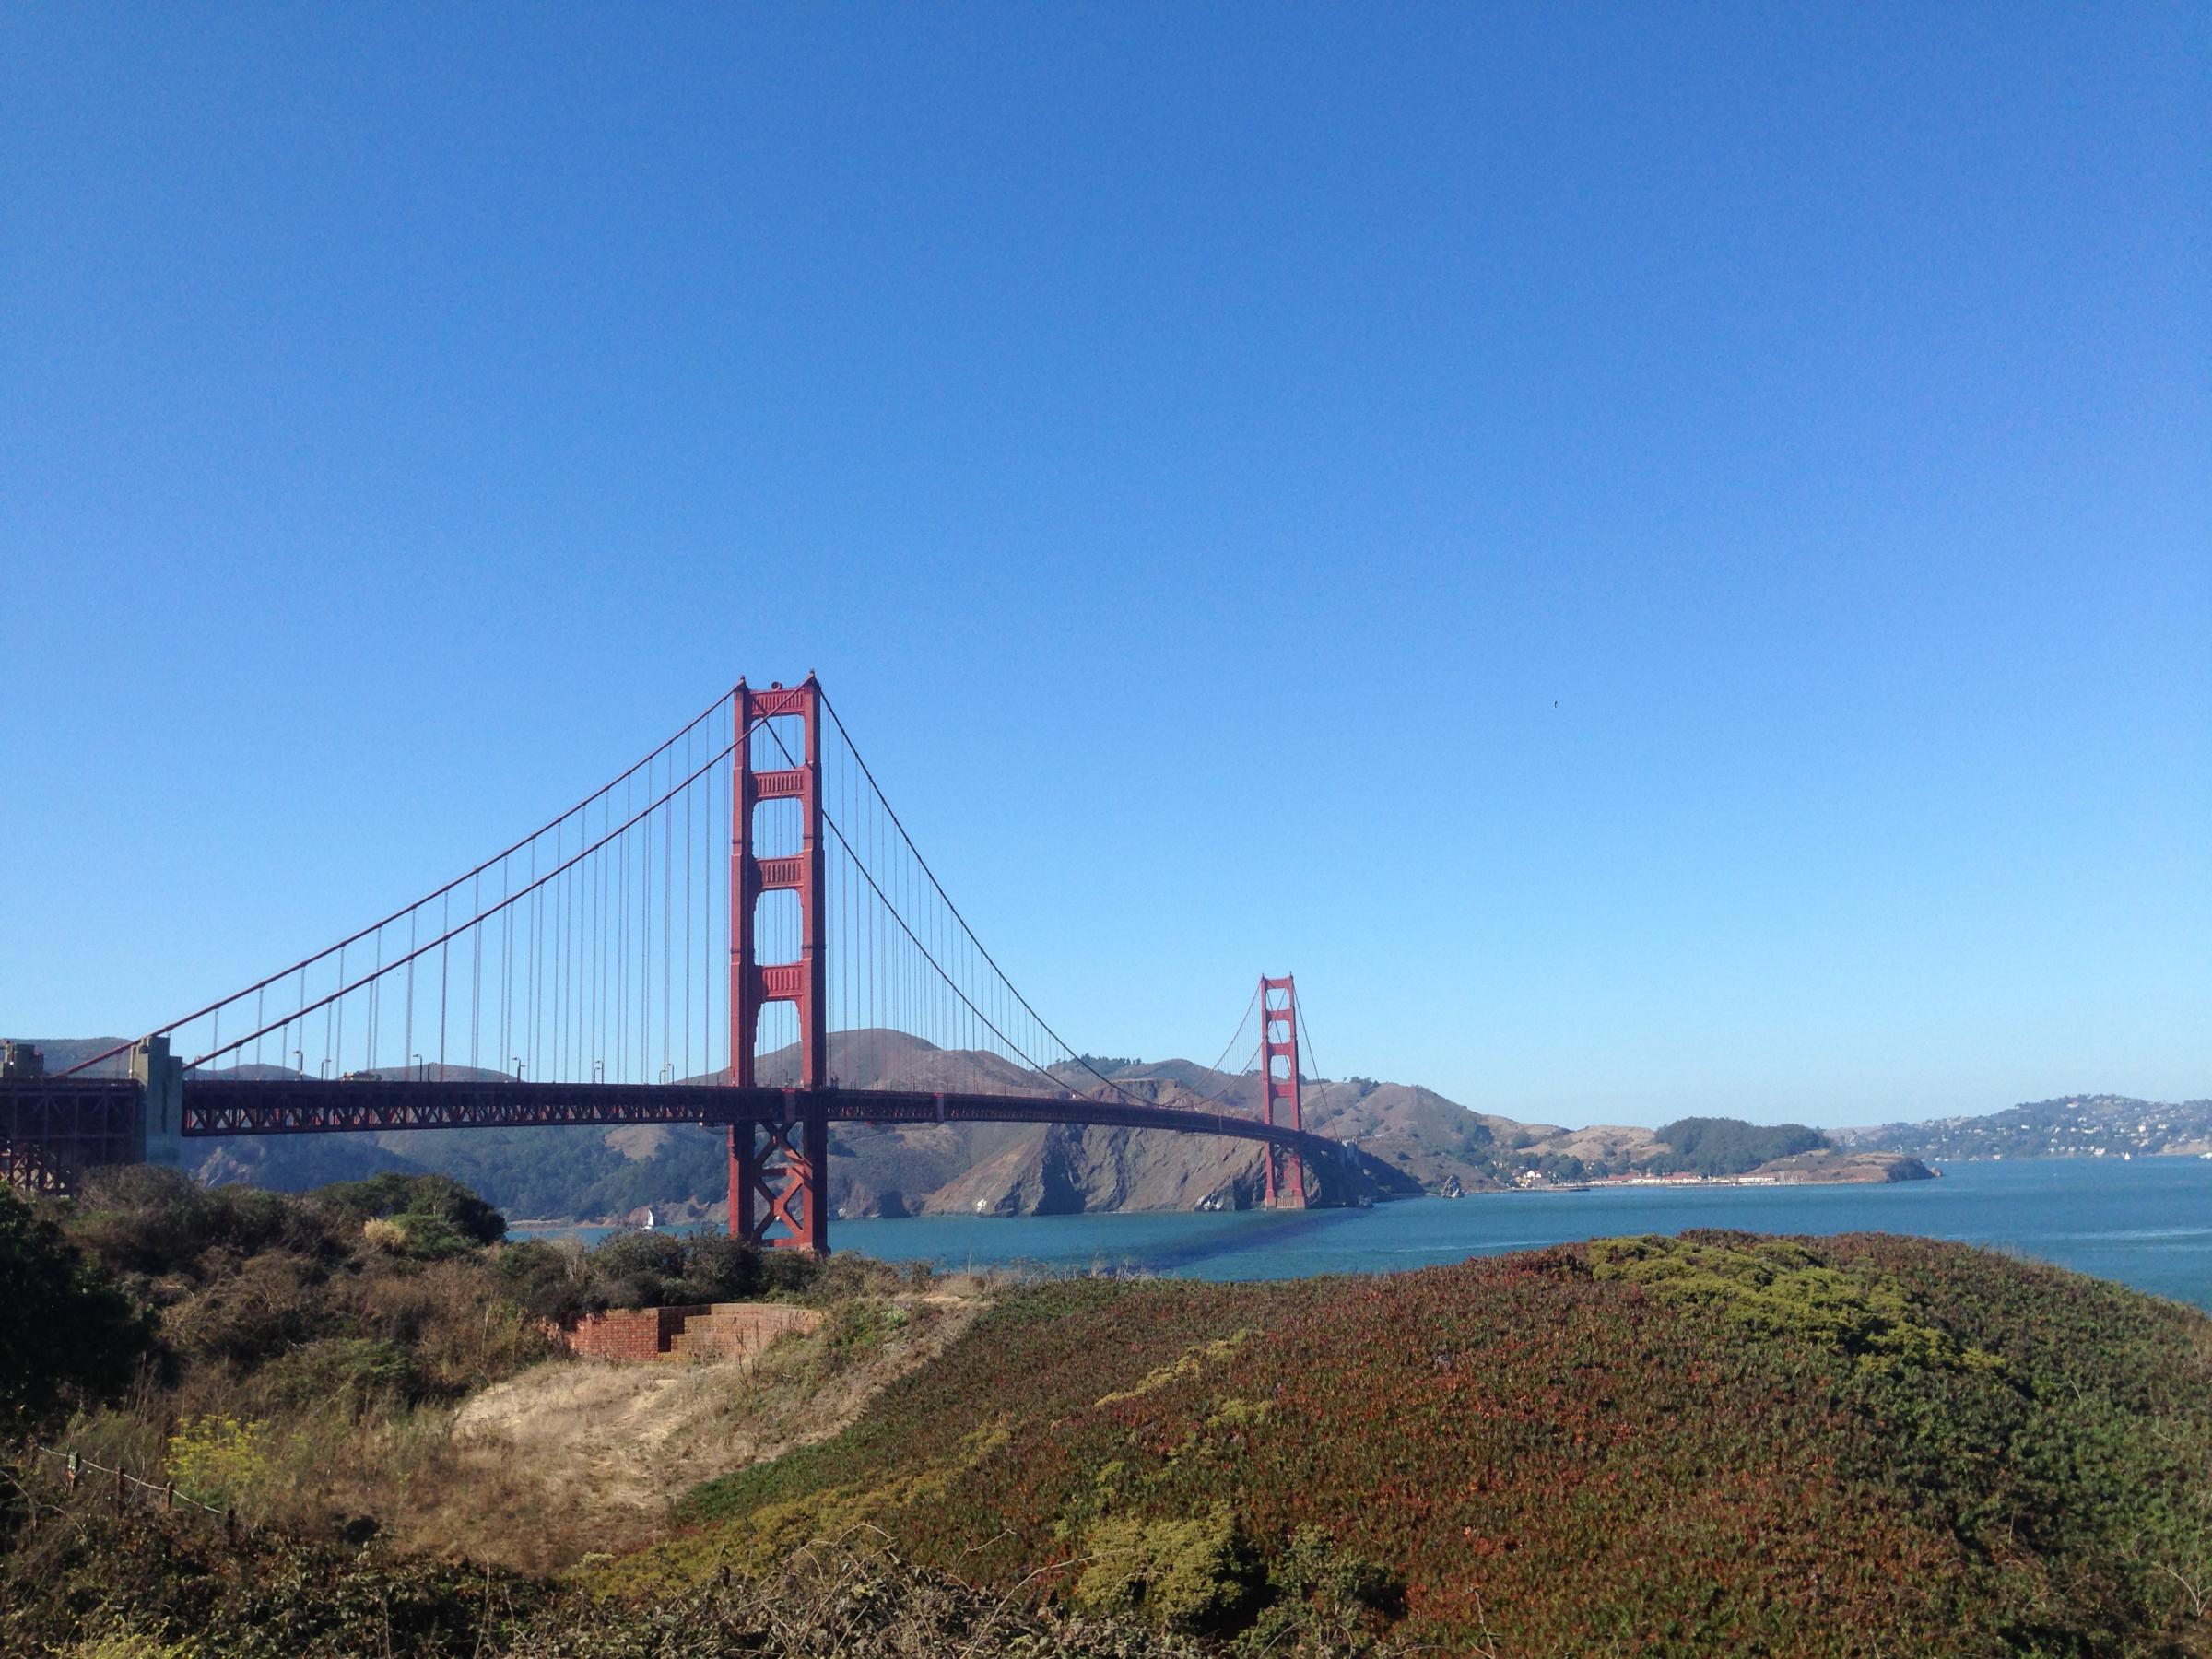 What could collapse the Golden Gate Bridge? | KALW